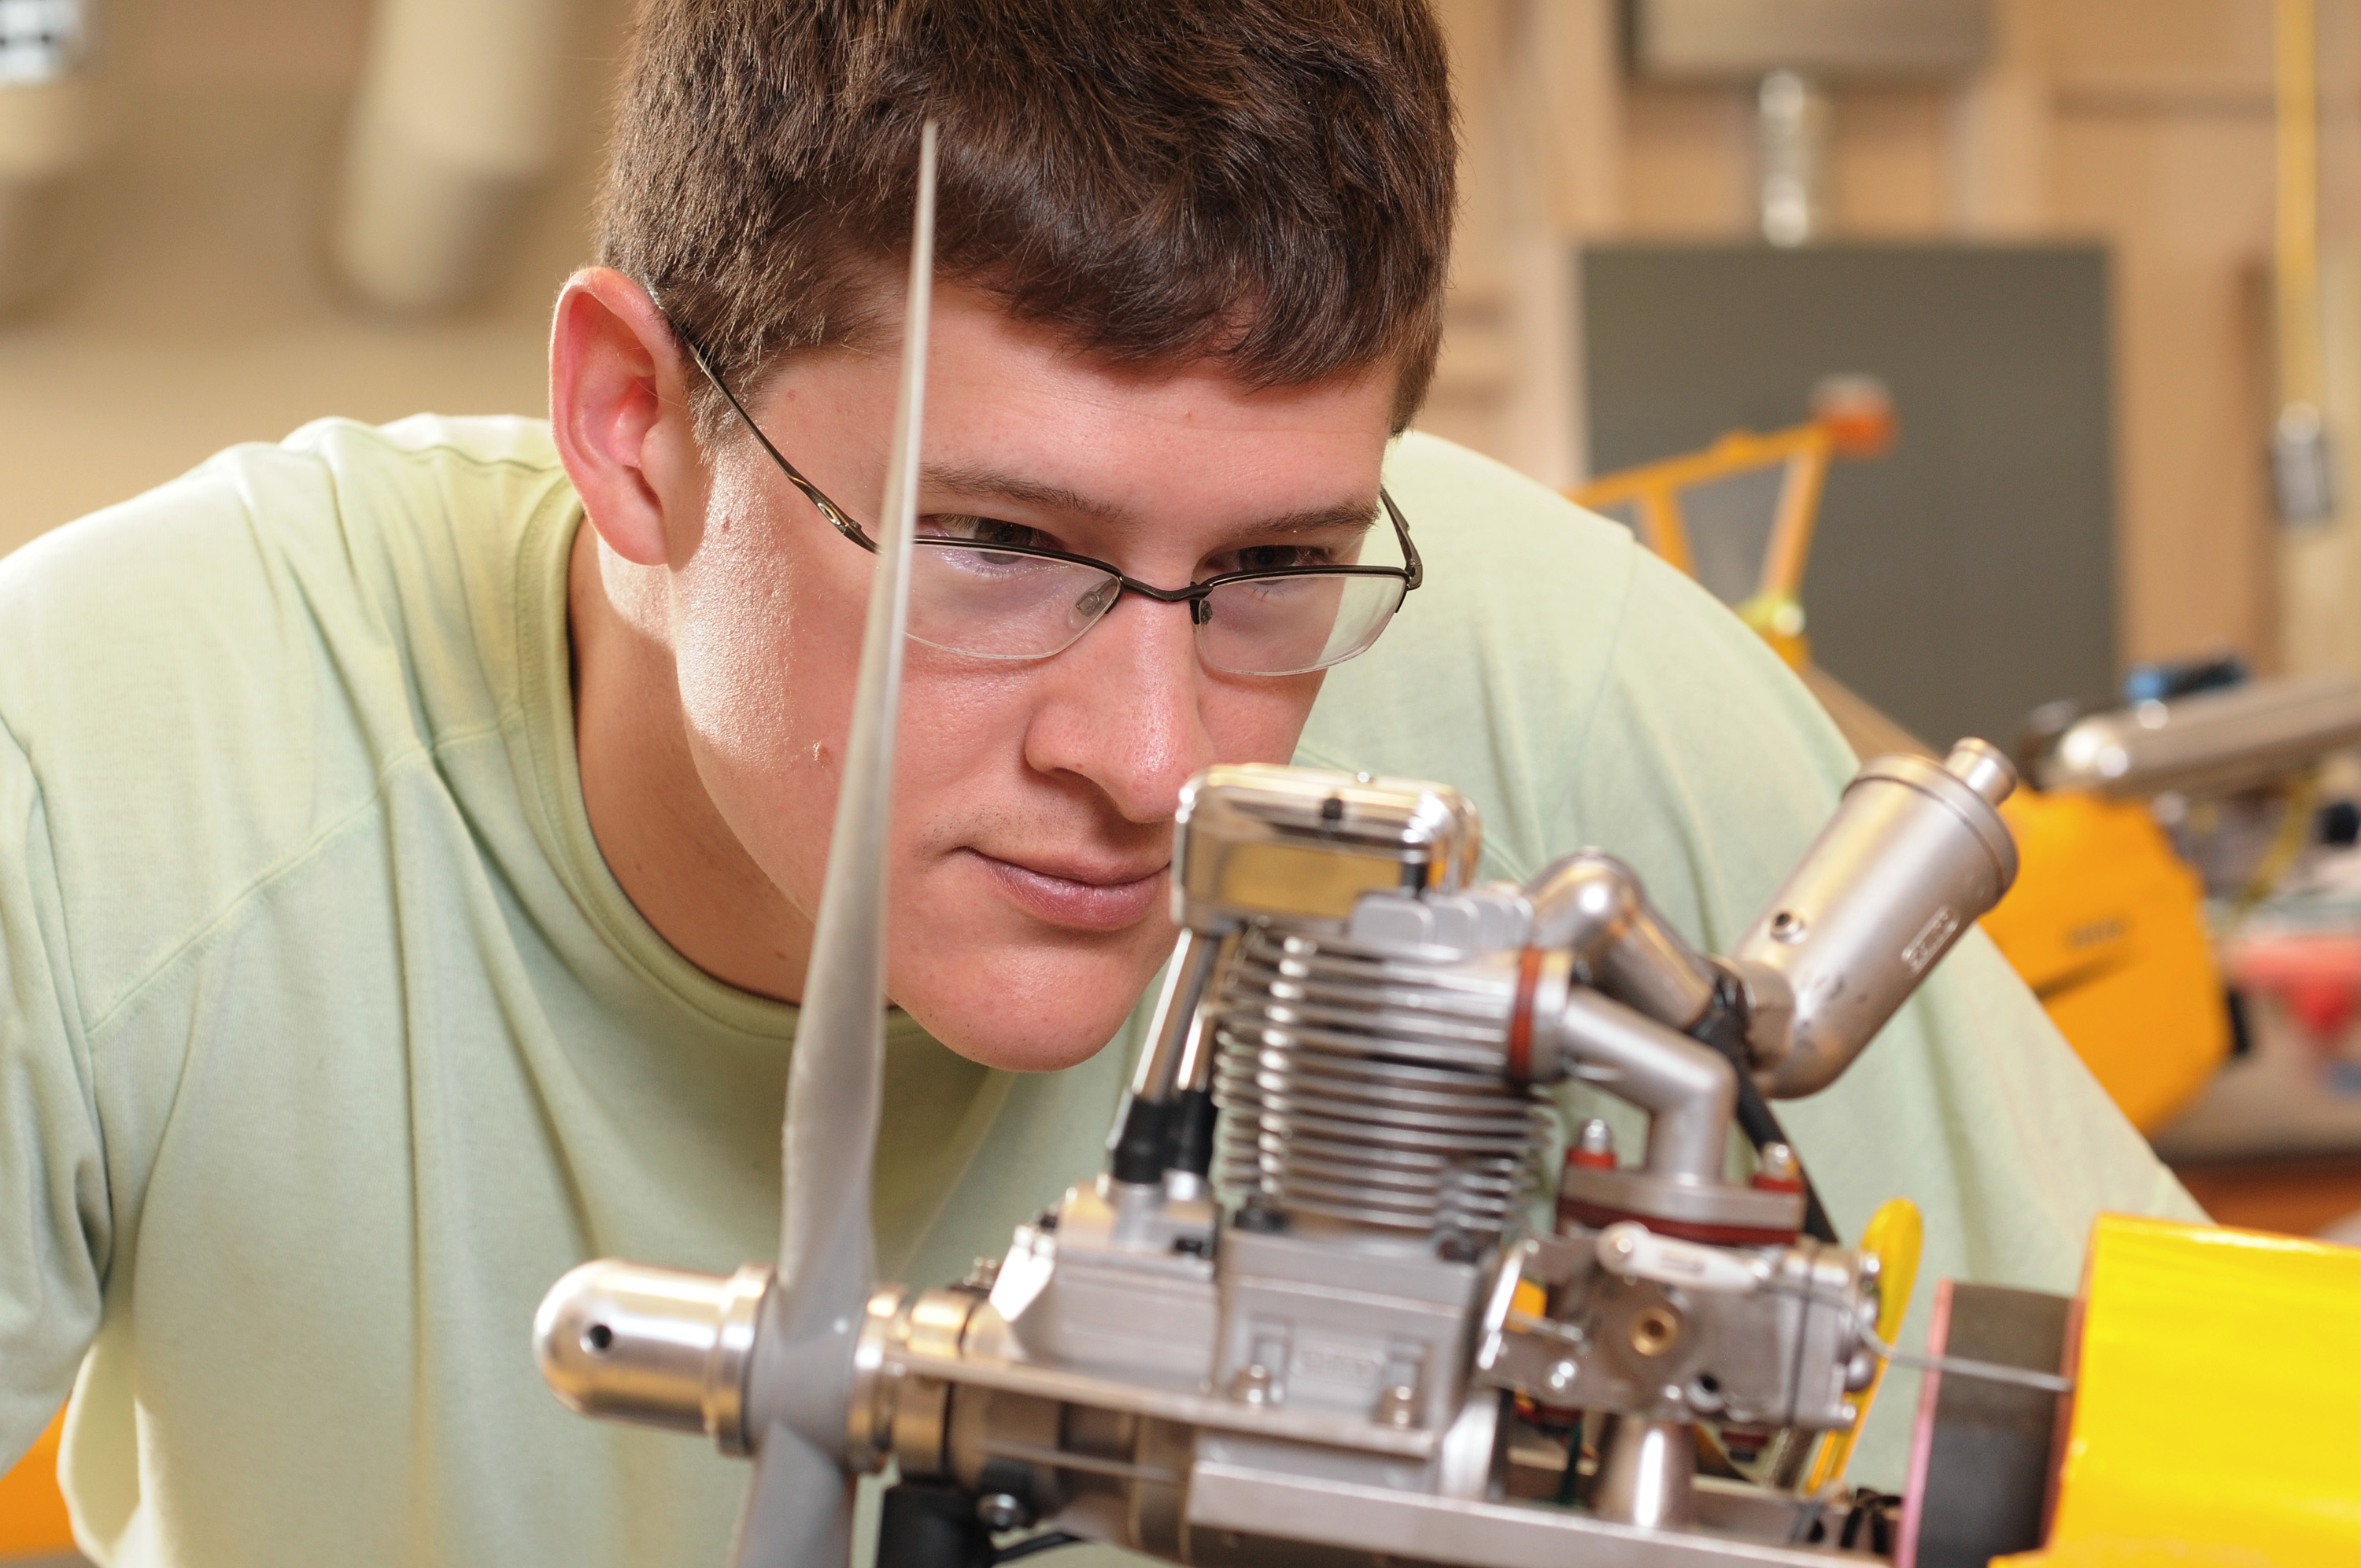 Kyle Carnahan, a researcher in the Georgia Tech Research Institute (GTRI), adjusts the engine of a quarter-scale Piper Cub aircraft used for research into collaboration between unmanned aerial vehicles. (Photo: Gary Meek)